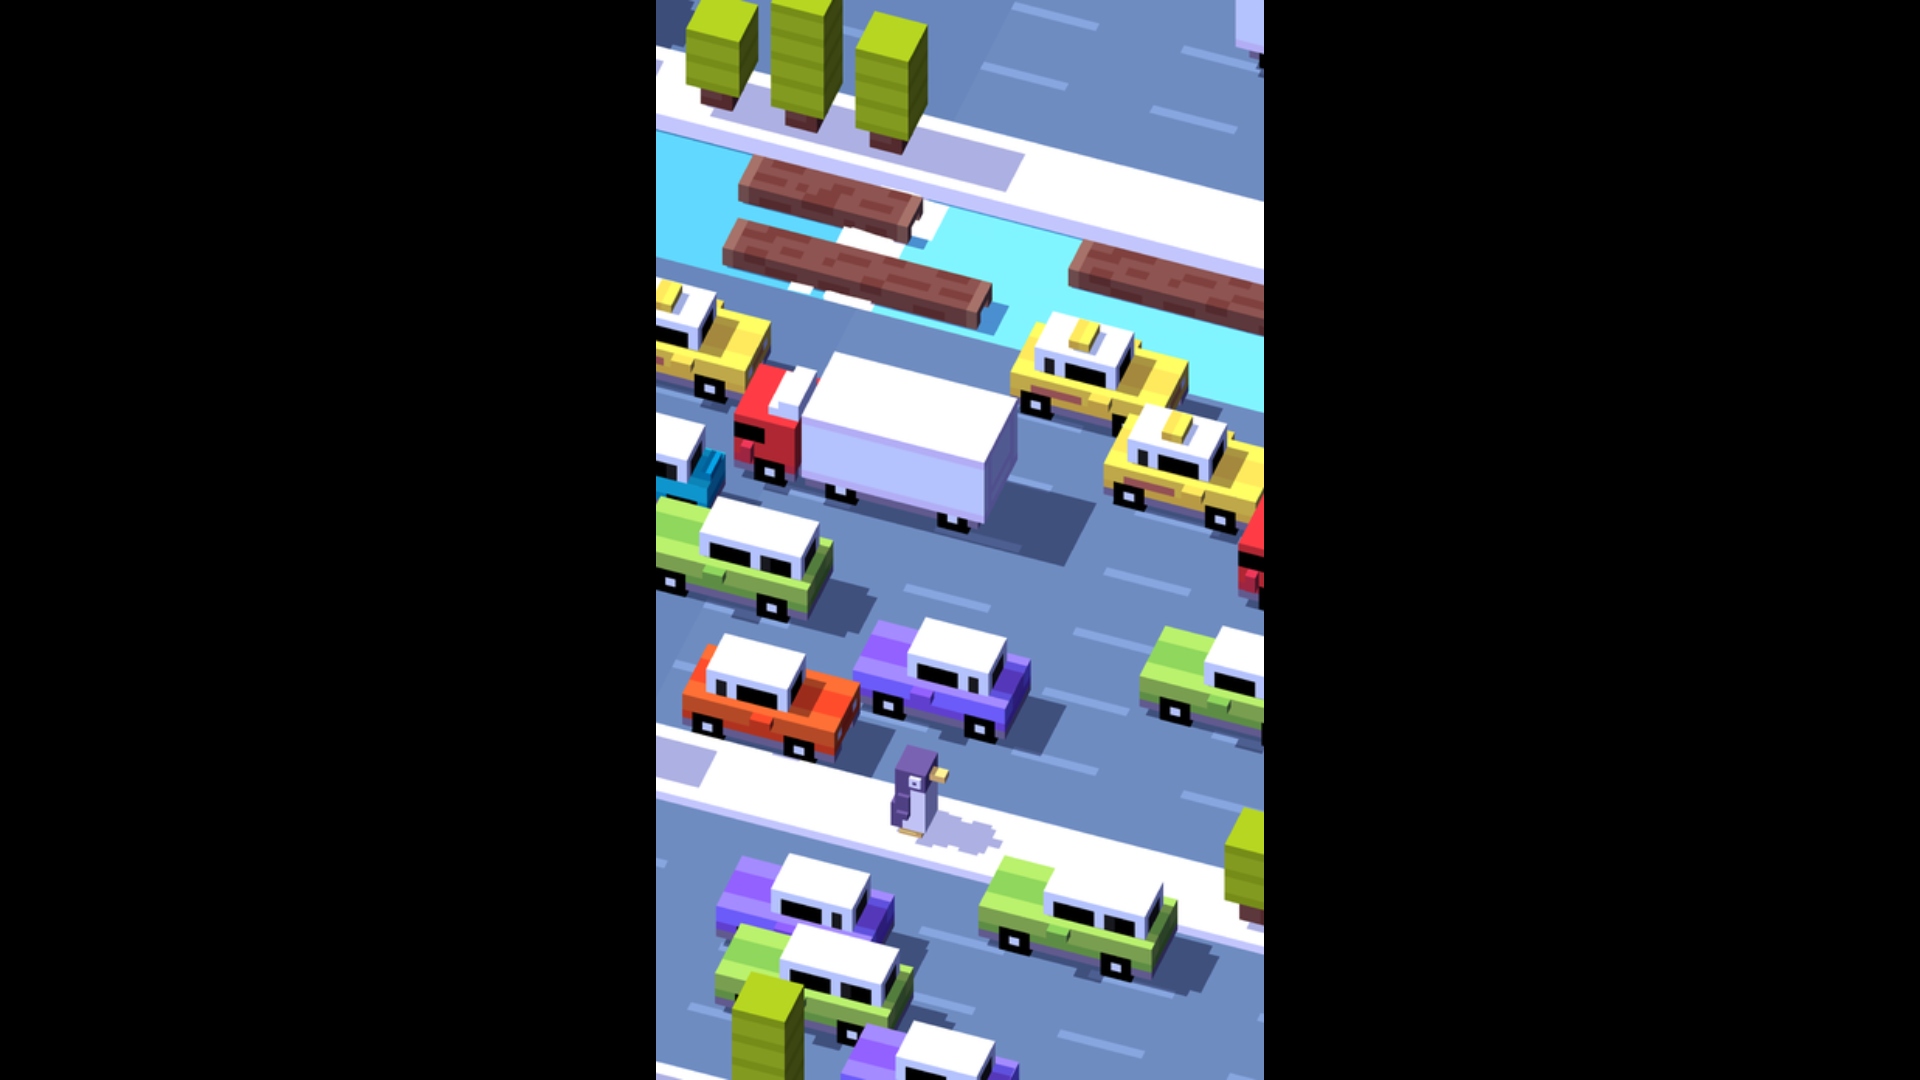 Addictive games - Crossy Road. Image shows a penguin trying to navigate a difficult road.